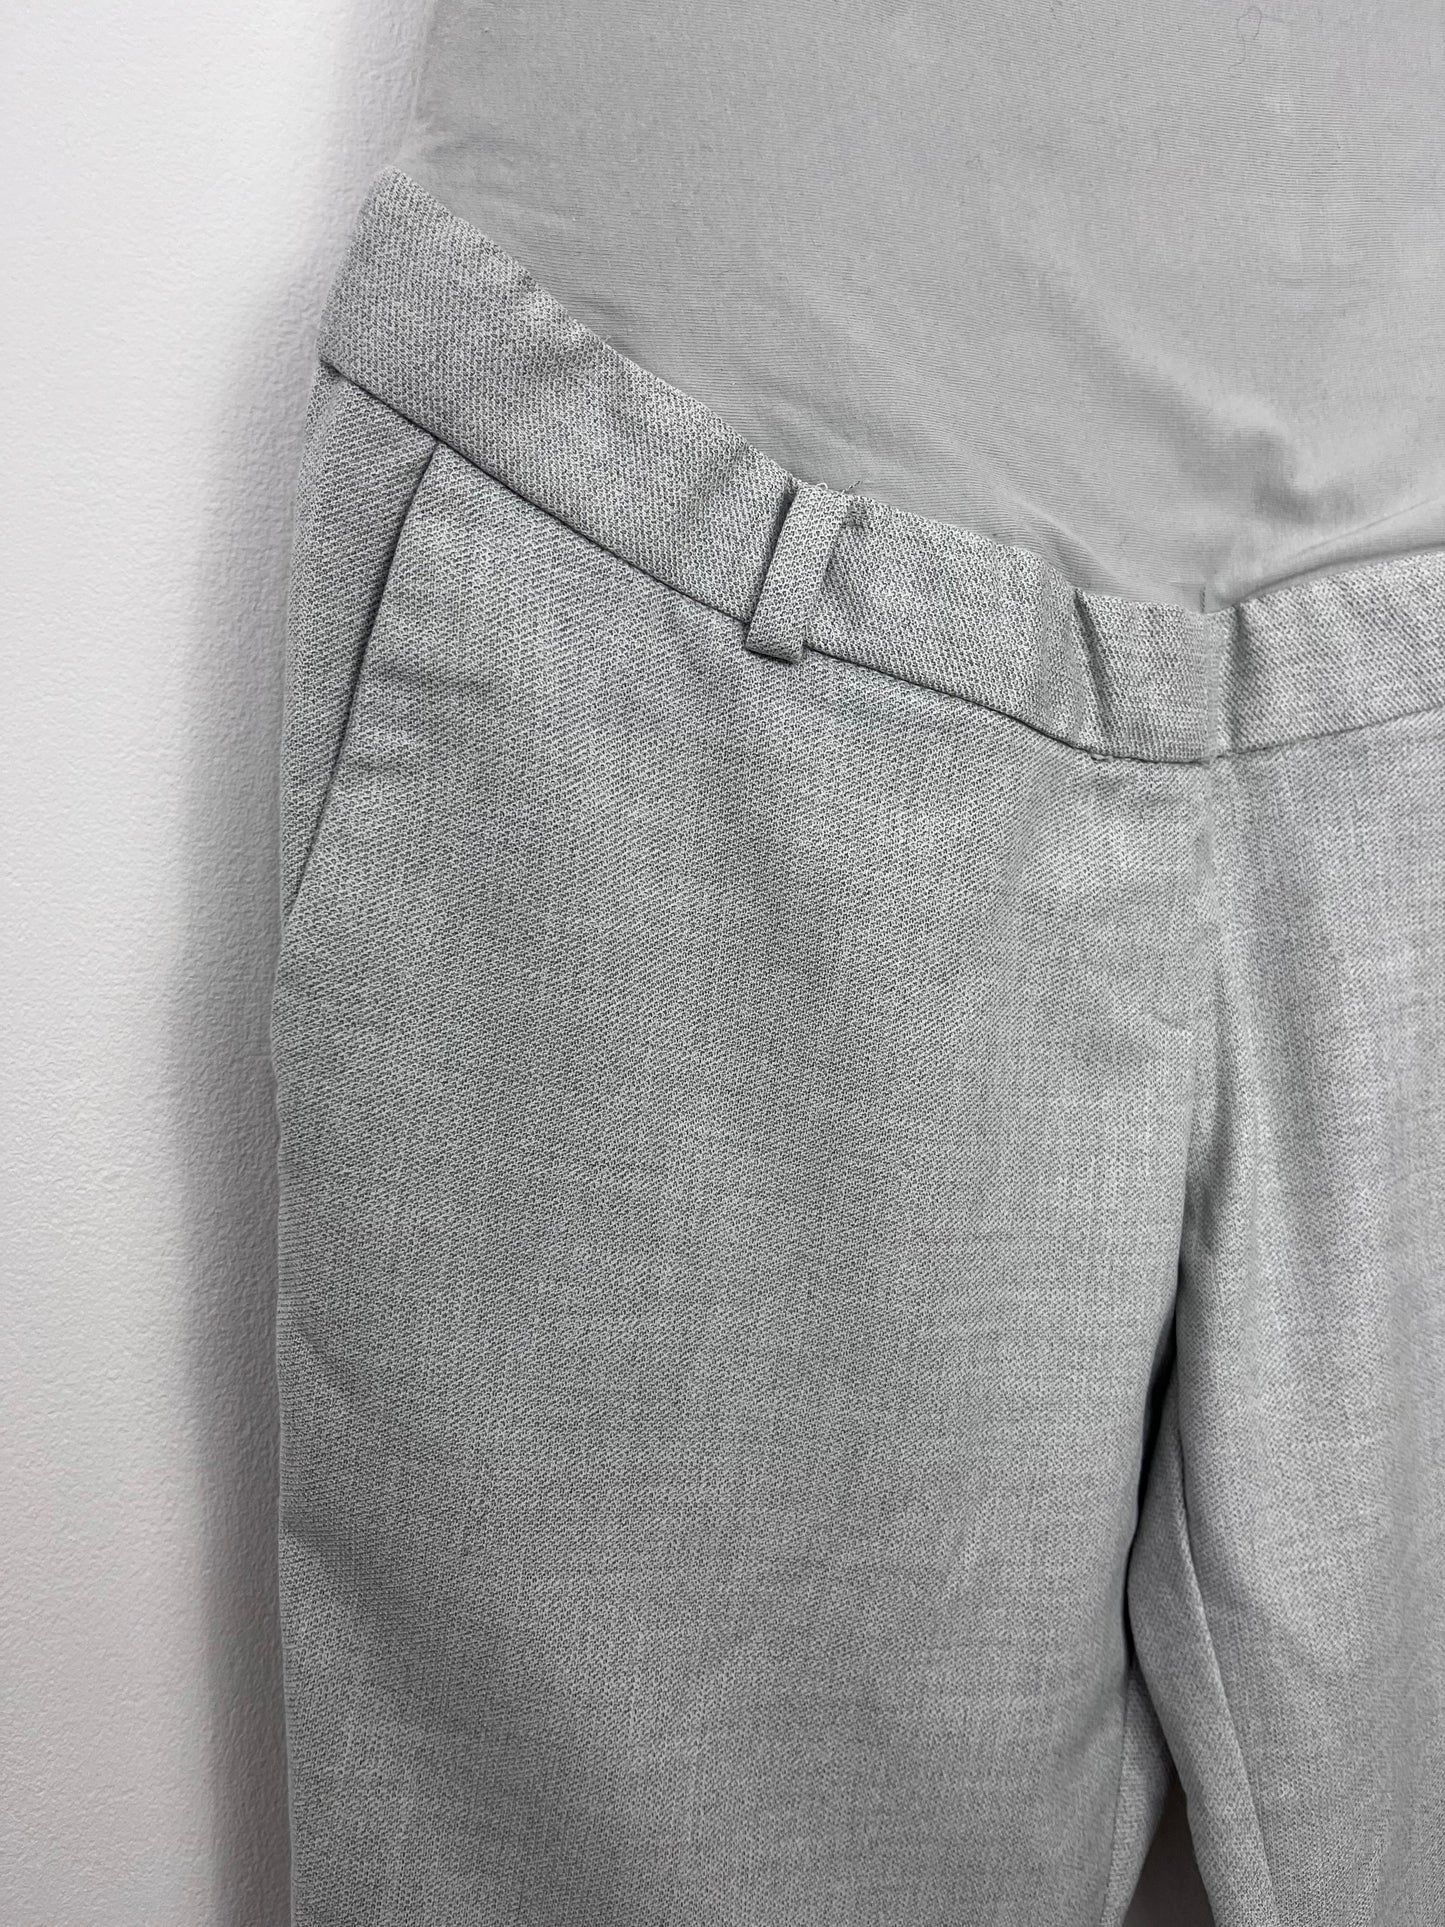 H&M Mama Size 12-Trousers-Second Snuggle Preloved